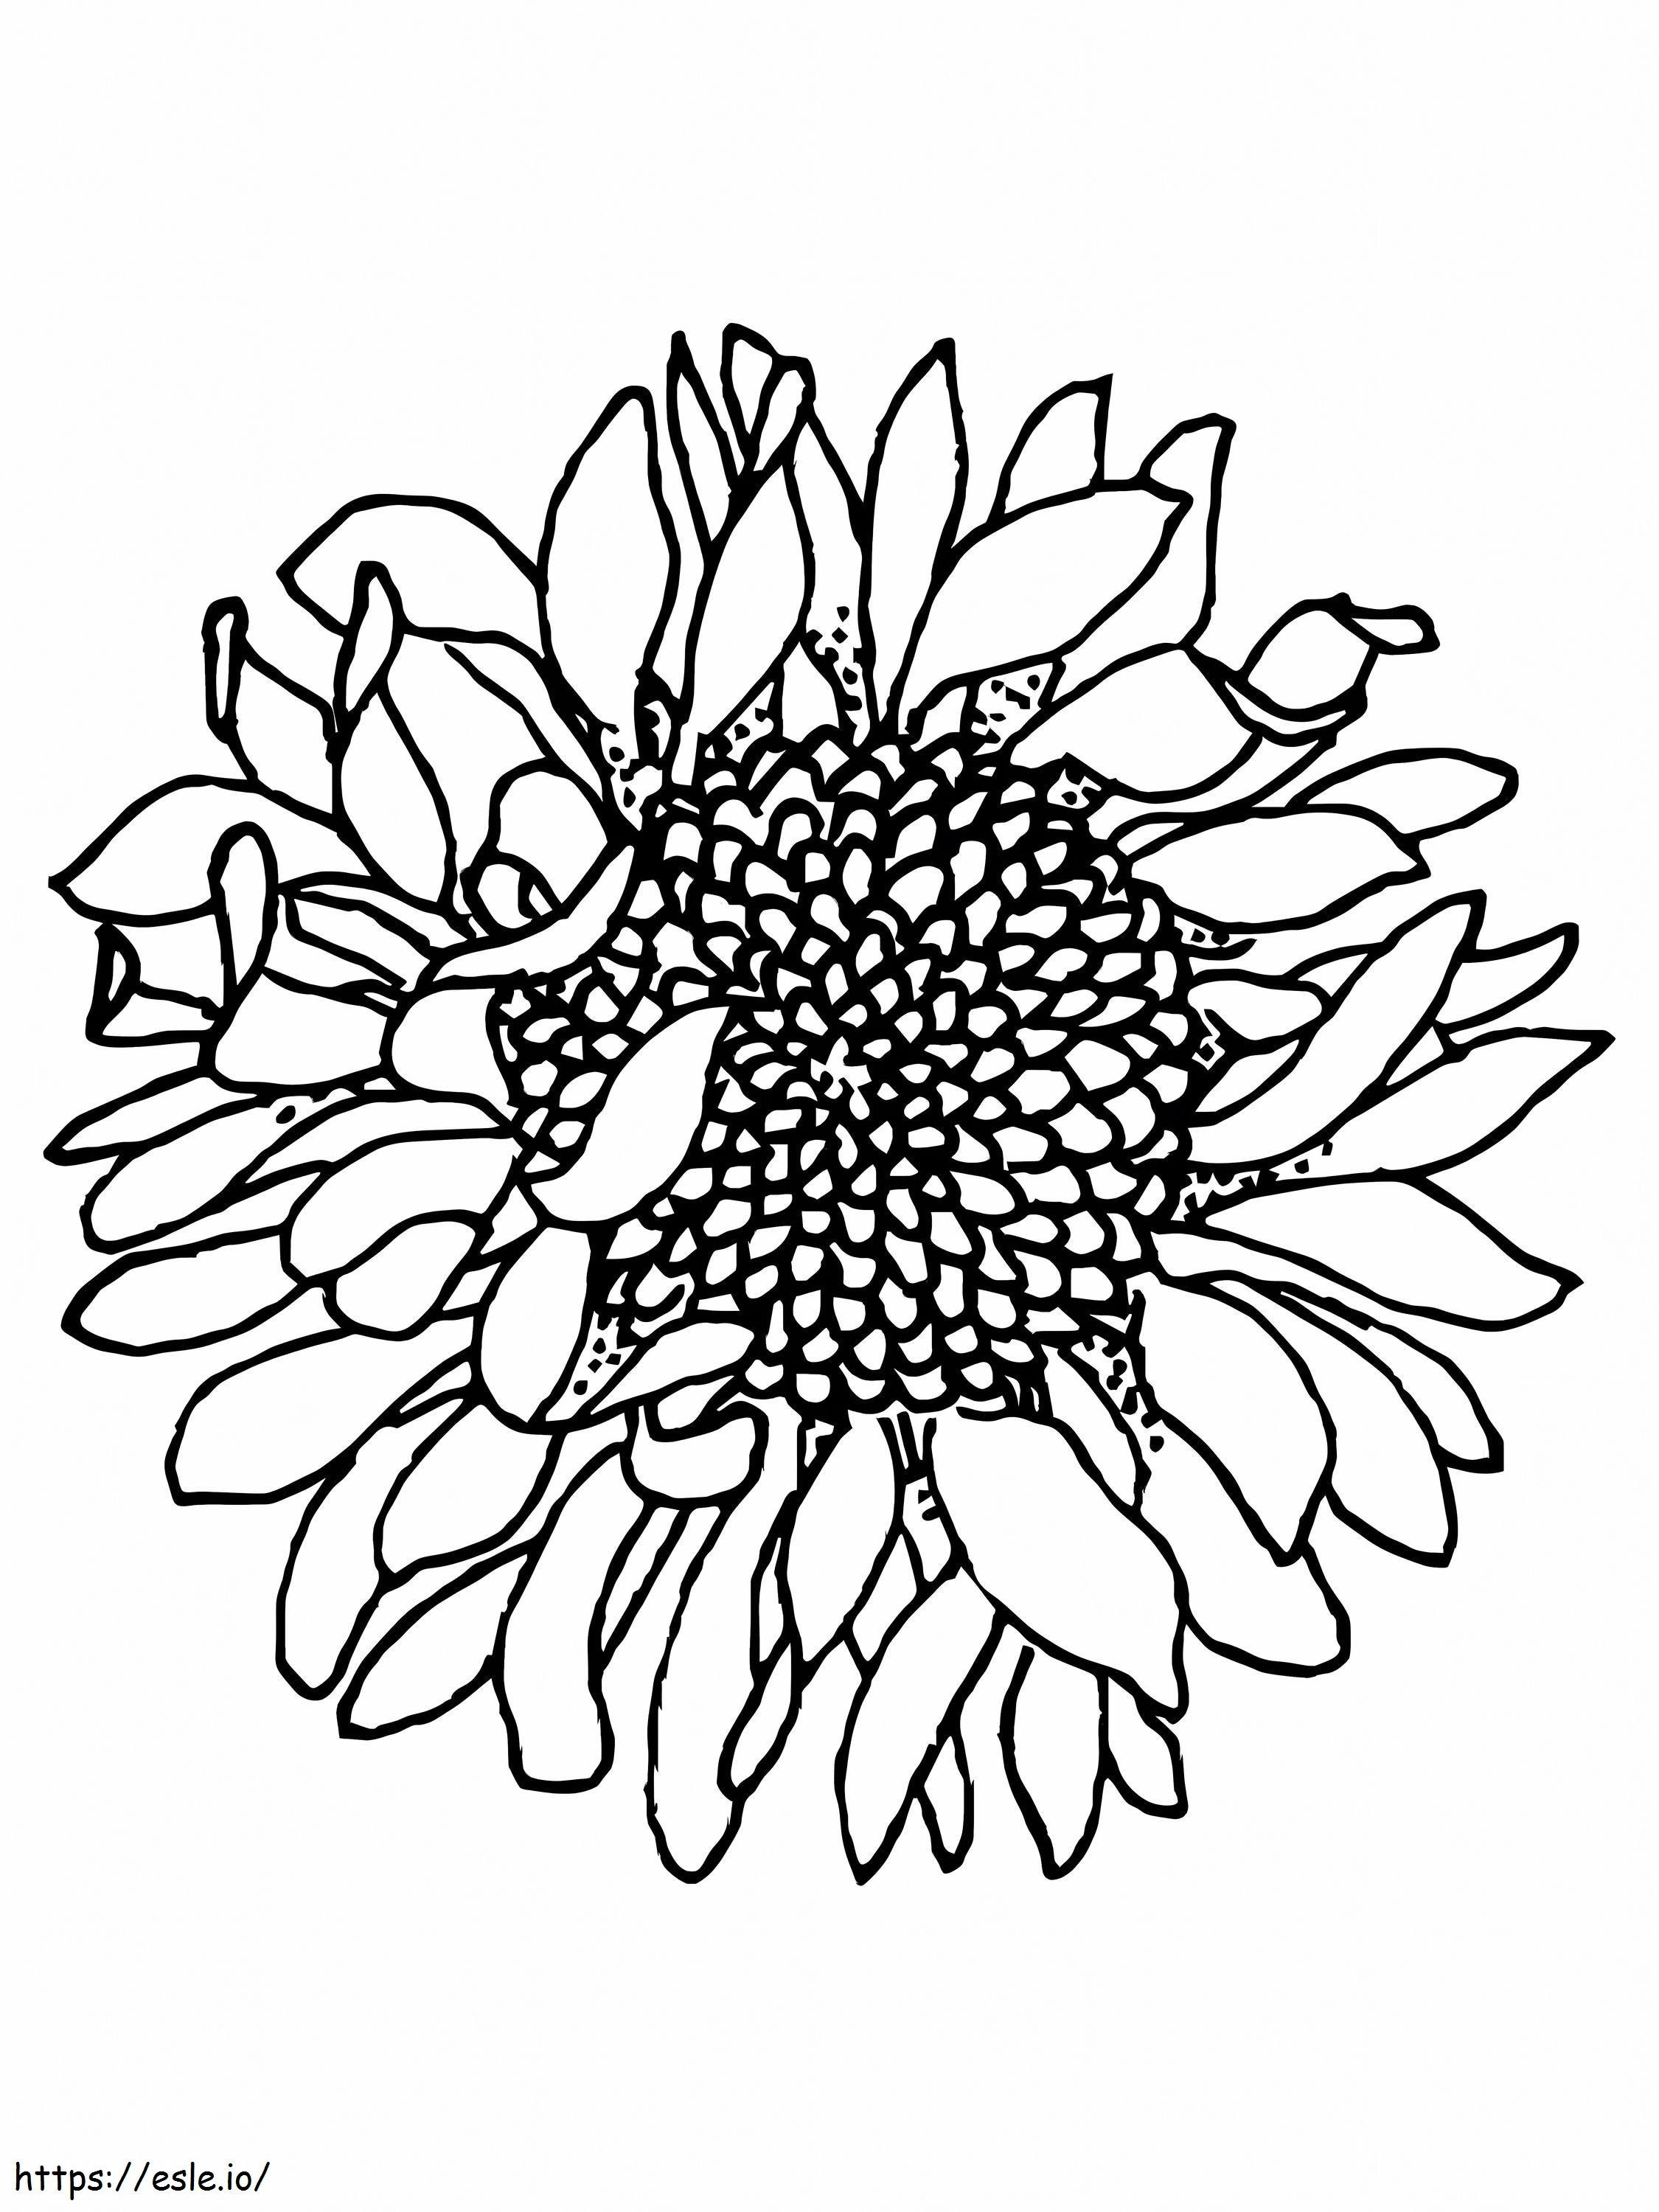 Withered Sunflowers coloring page